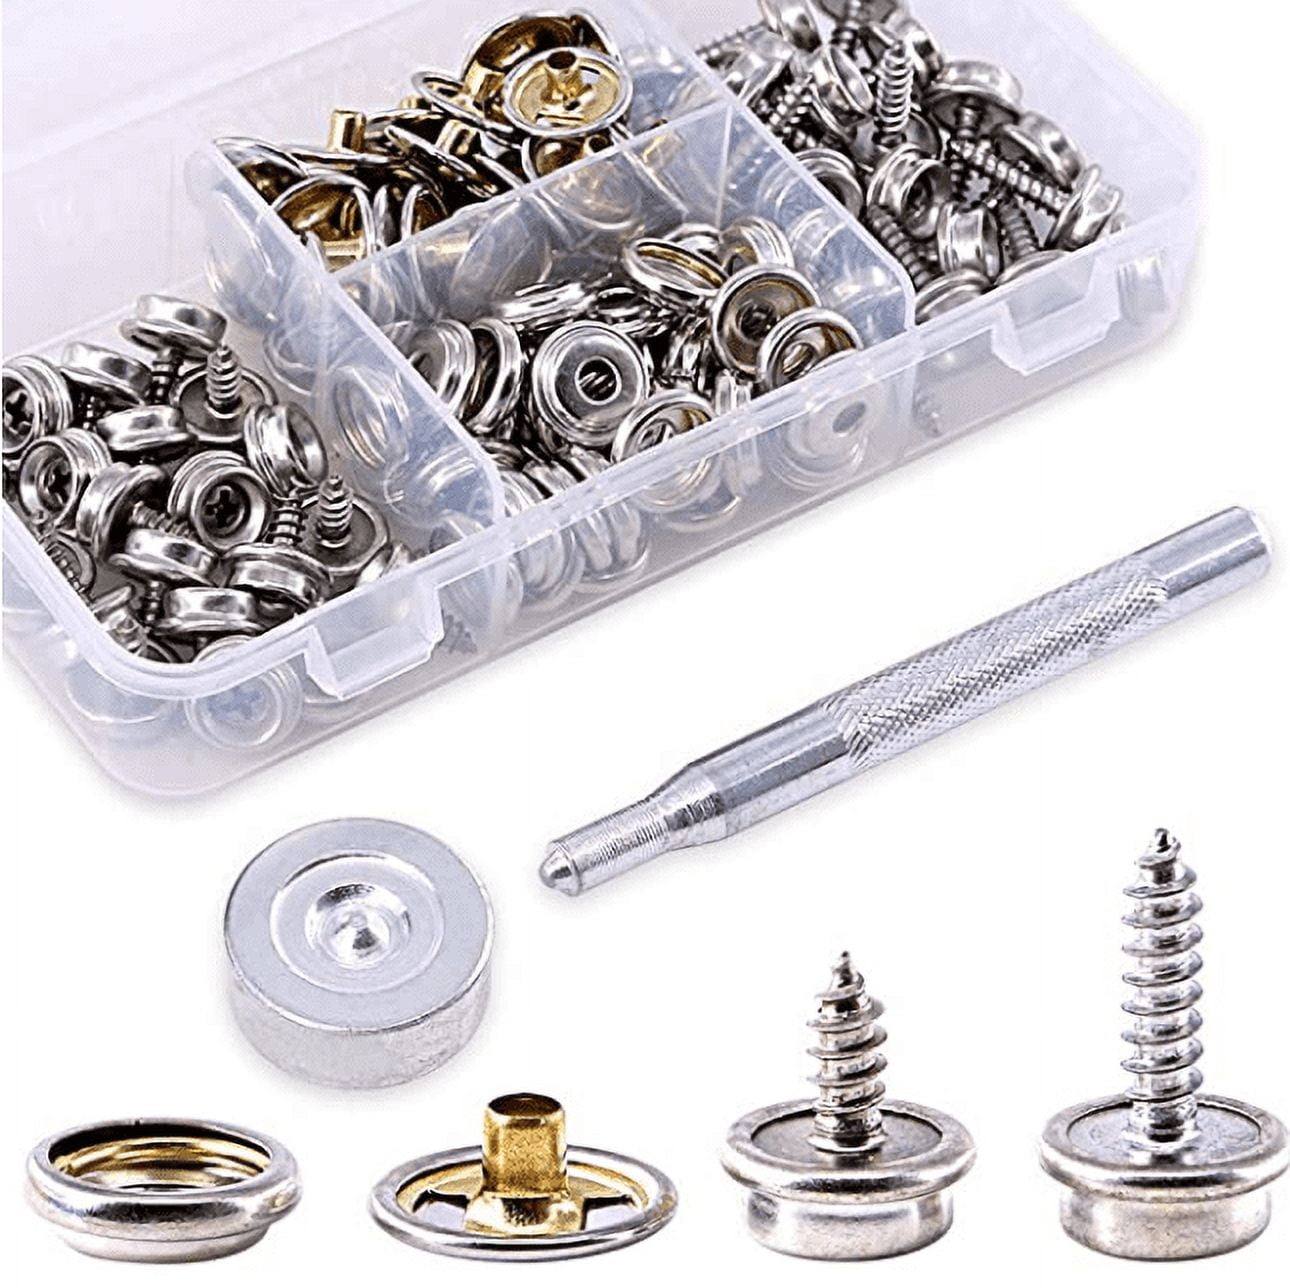 CENOZ 150 PCS Canvas Snap Kit Tool, Metal Screws Snaps Marine Grade 3/8  Socket Stainless Steel Boat Canvas Snaps with 2 PCS Setting Tool for Boat